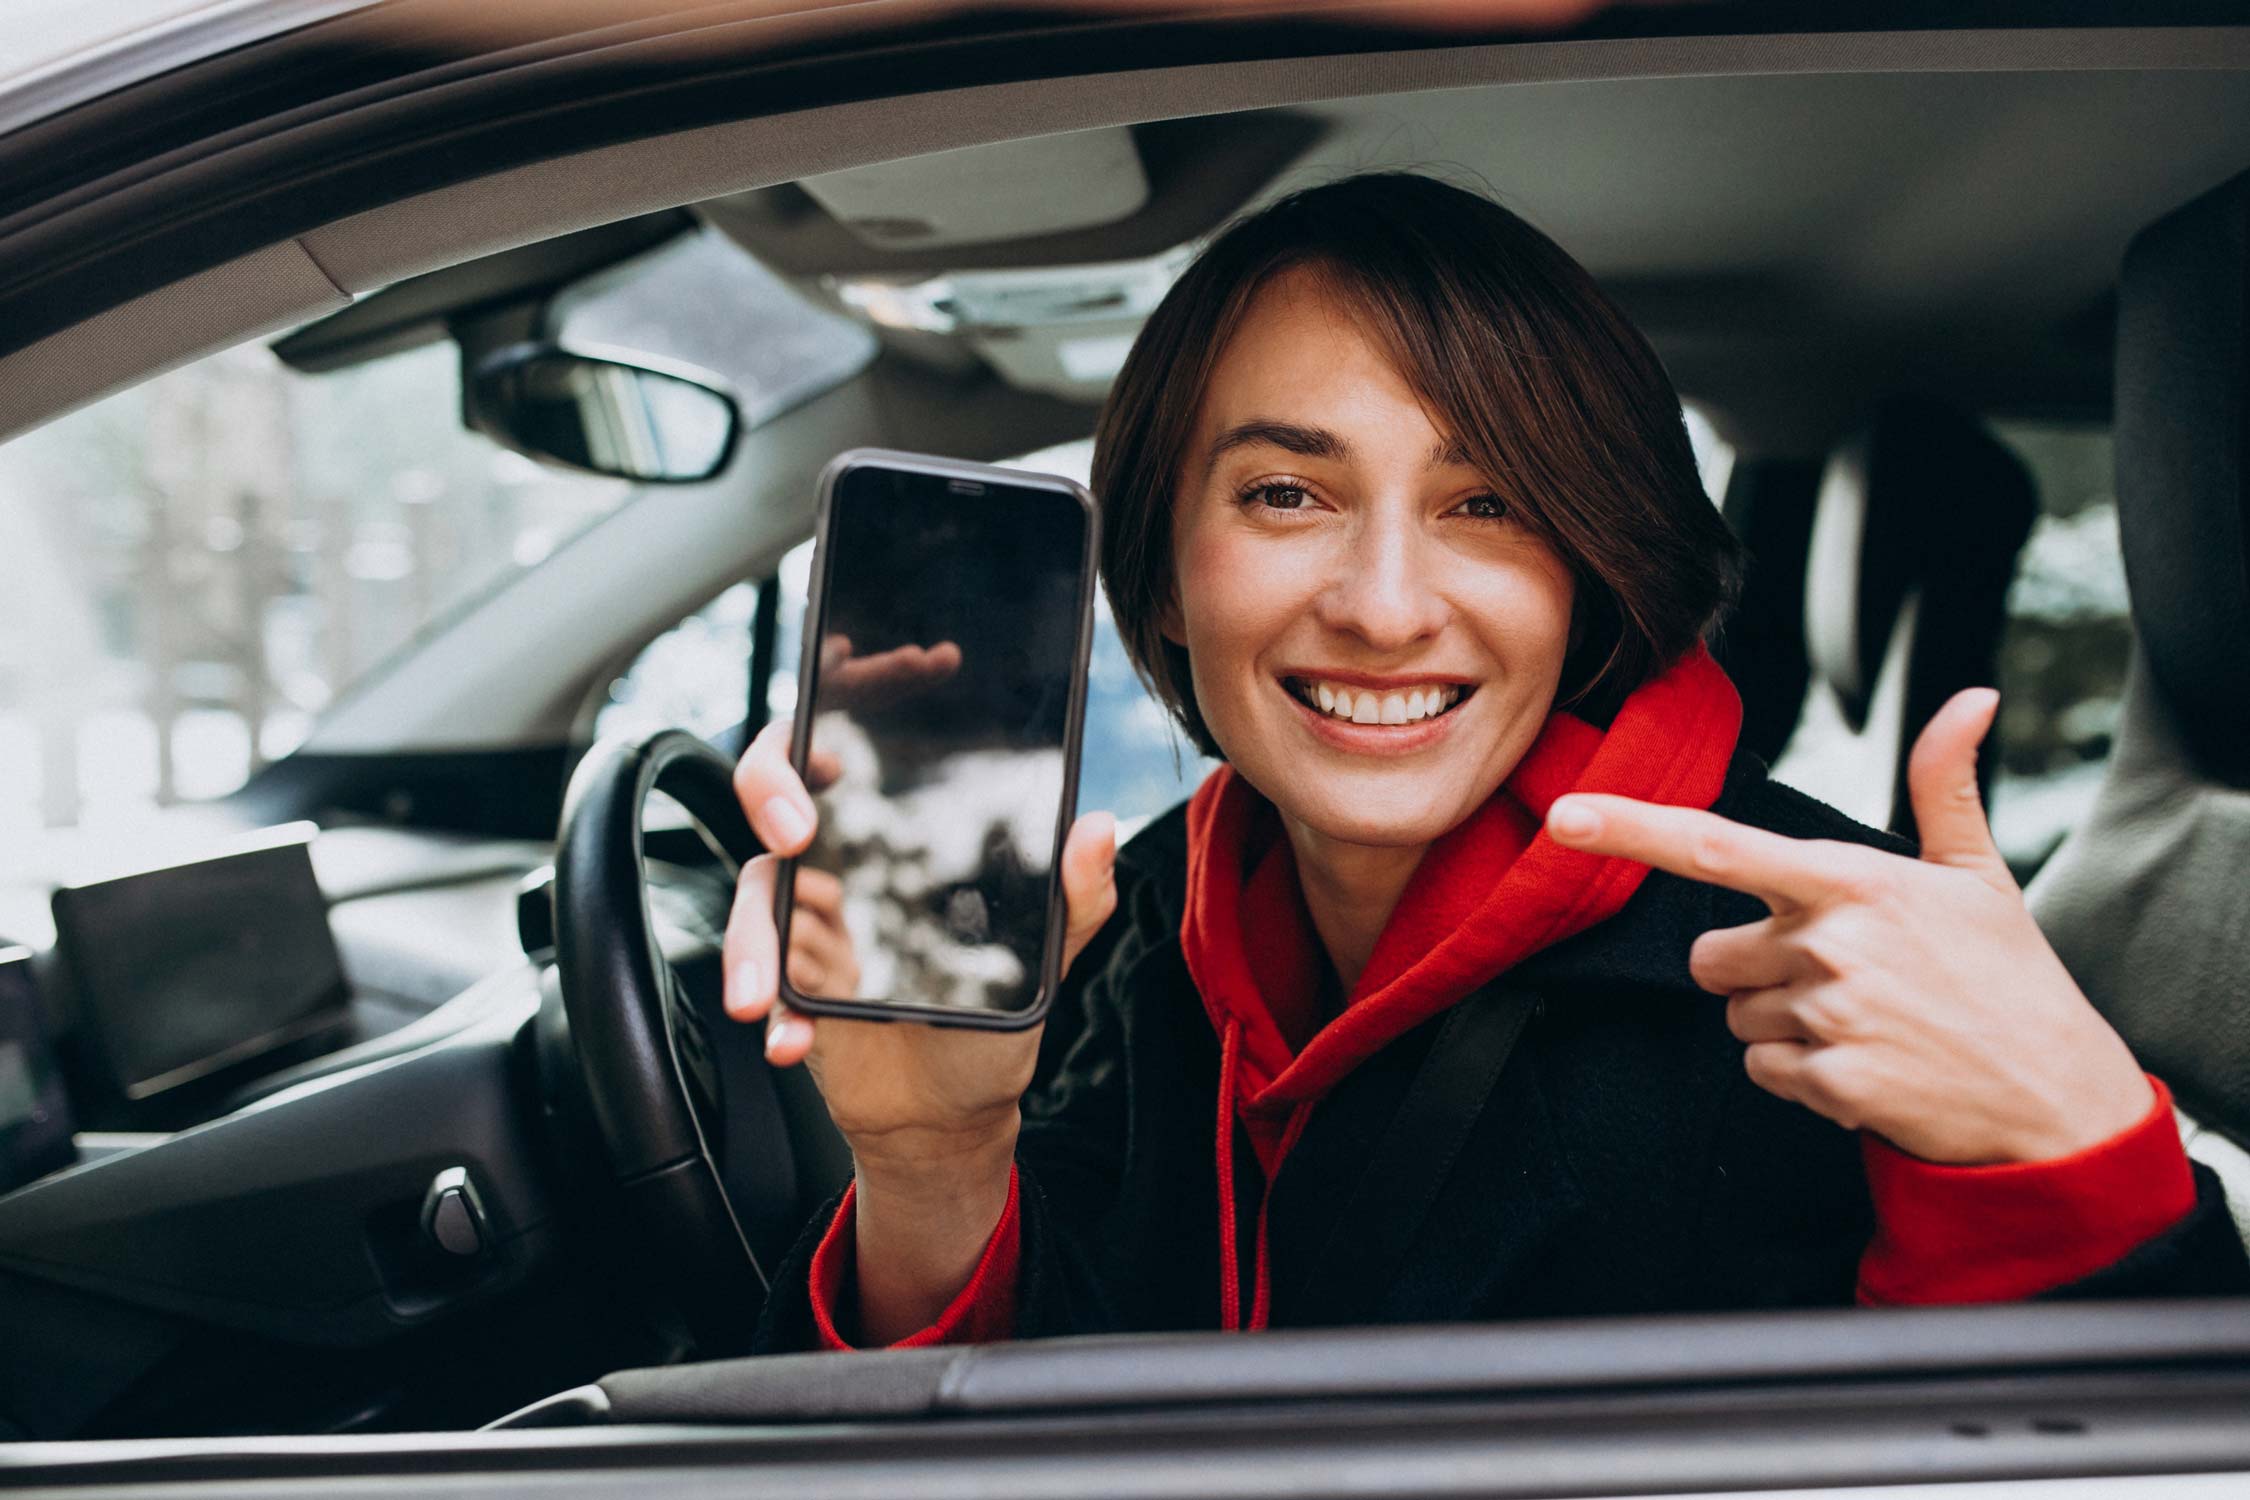 Girl in a rental car smiles while pointing to a smartphone